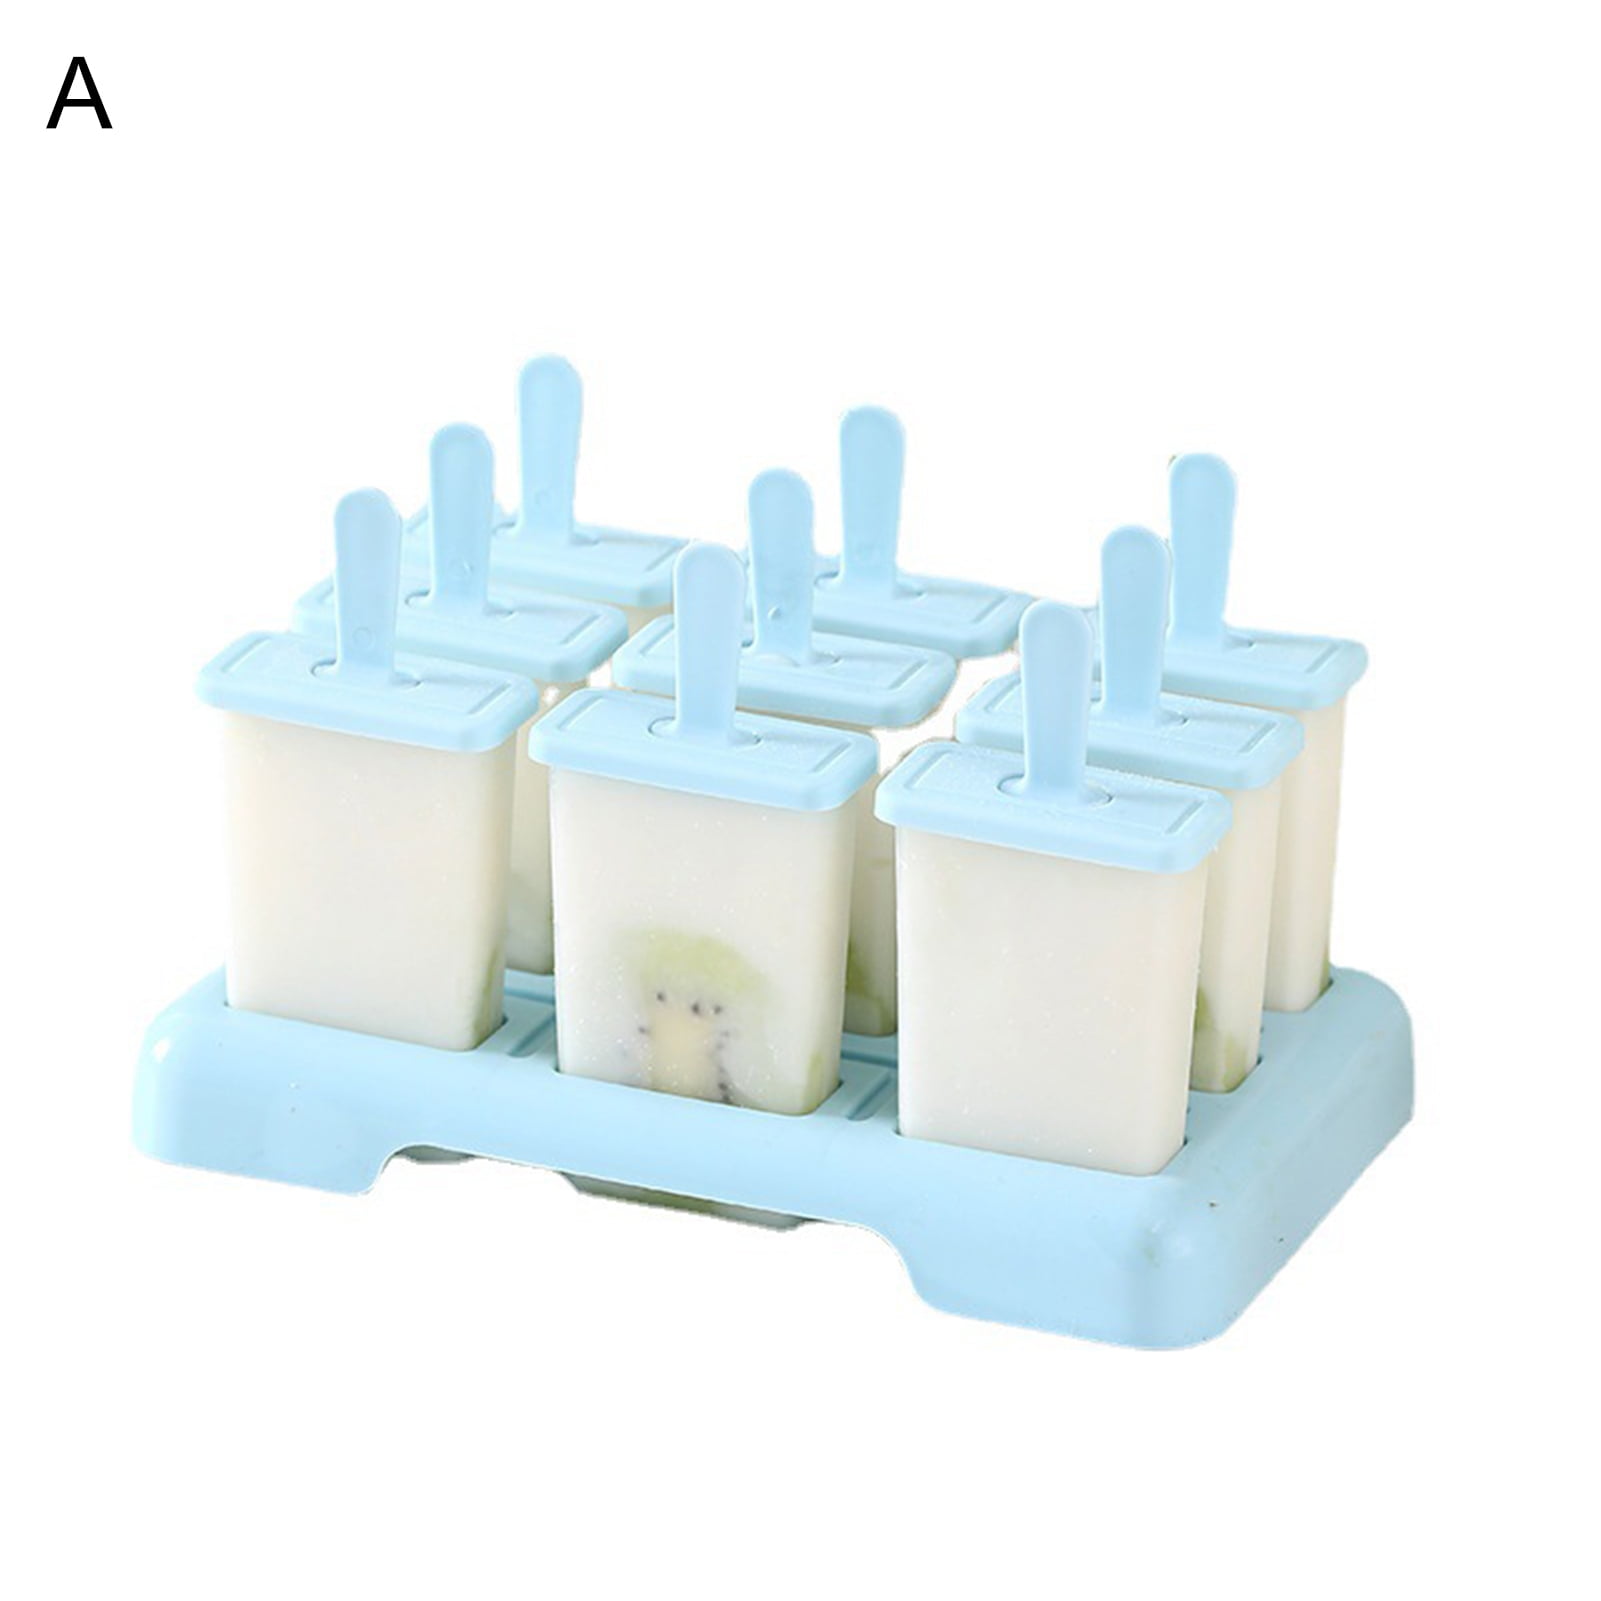 Yirtree Silicone Popsicle Molds Maker,Large Homemade Ice Pop Molds Food Grade BPA Free Popsicle Mold Ice Cream Mold Food Grade Non-Stick PVC Ice Pop